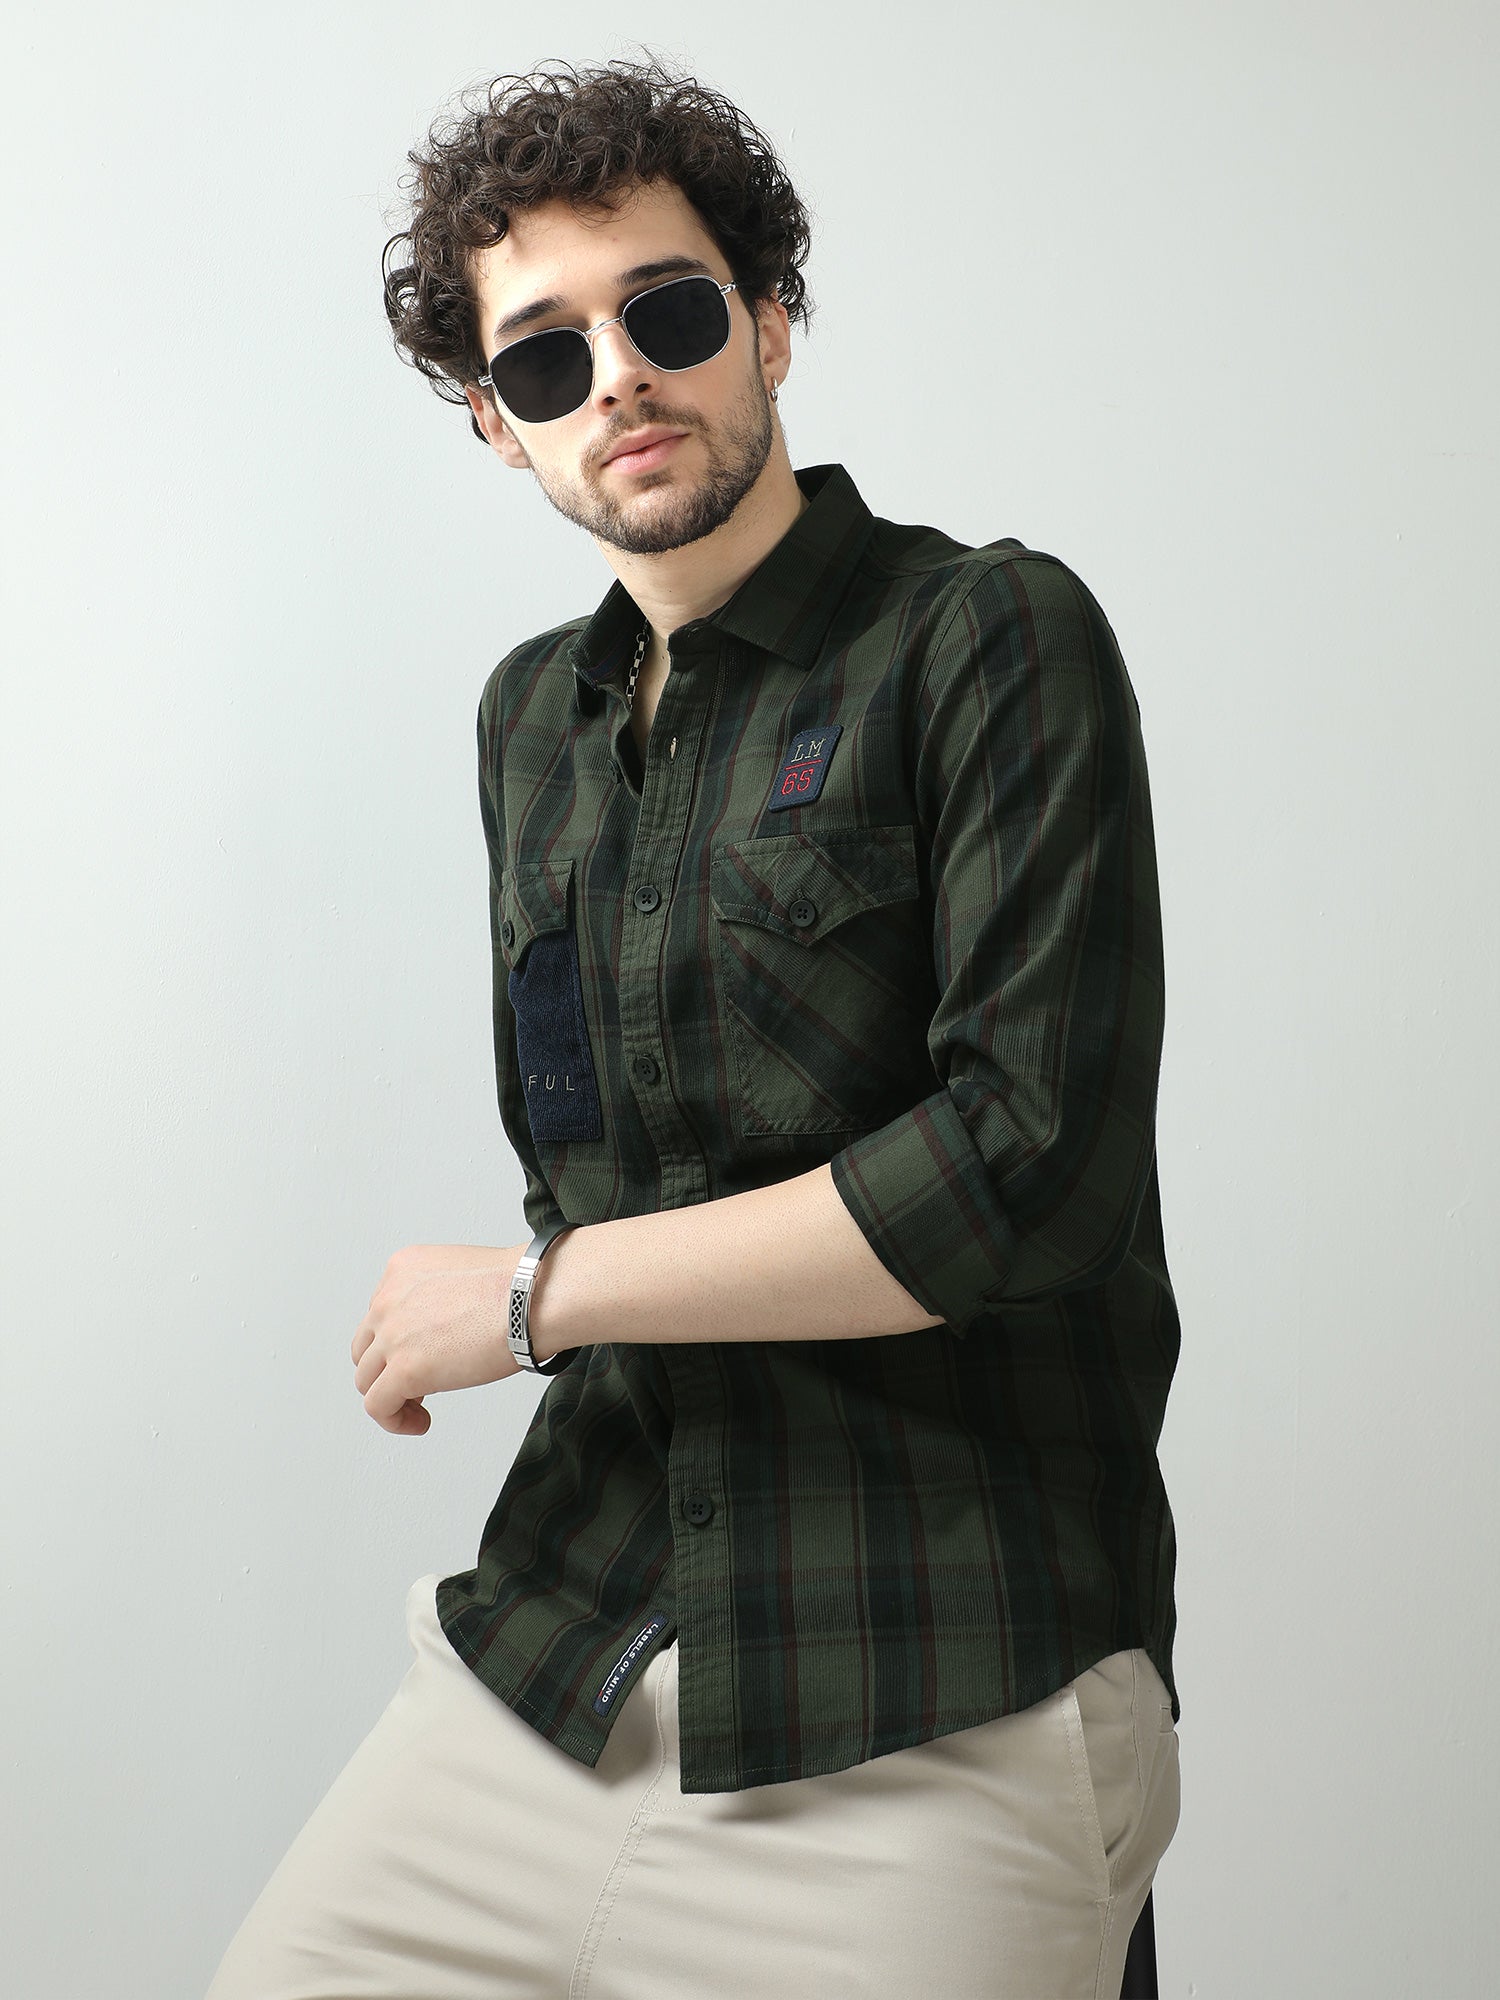 Buy Sap Green And Prune Corduroy Shirts Mens India OnlineRs. 1449.00